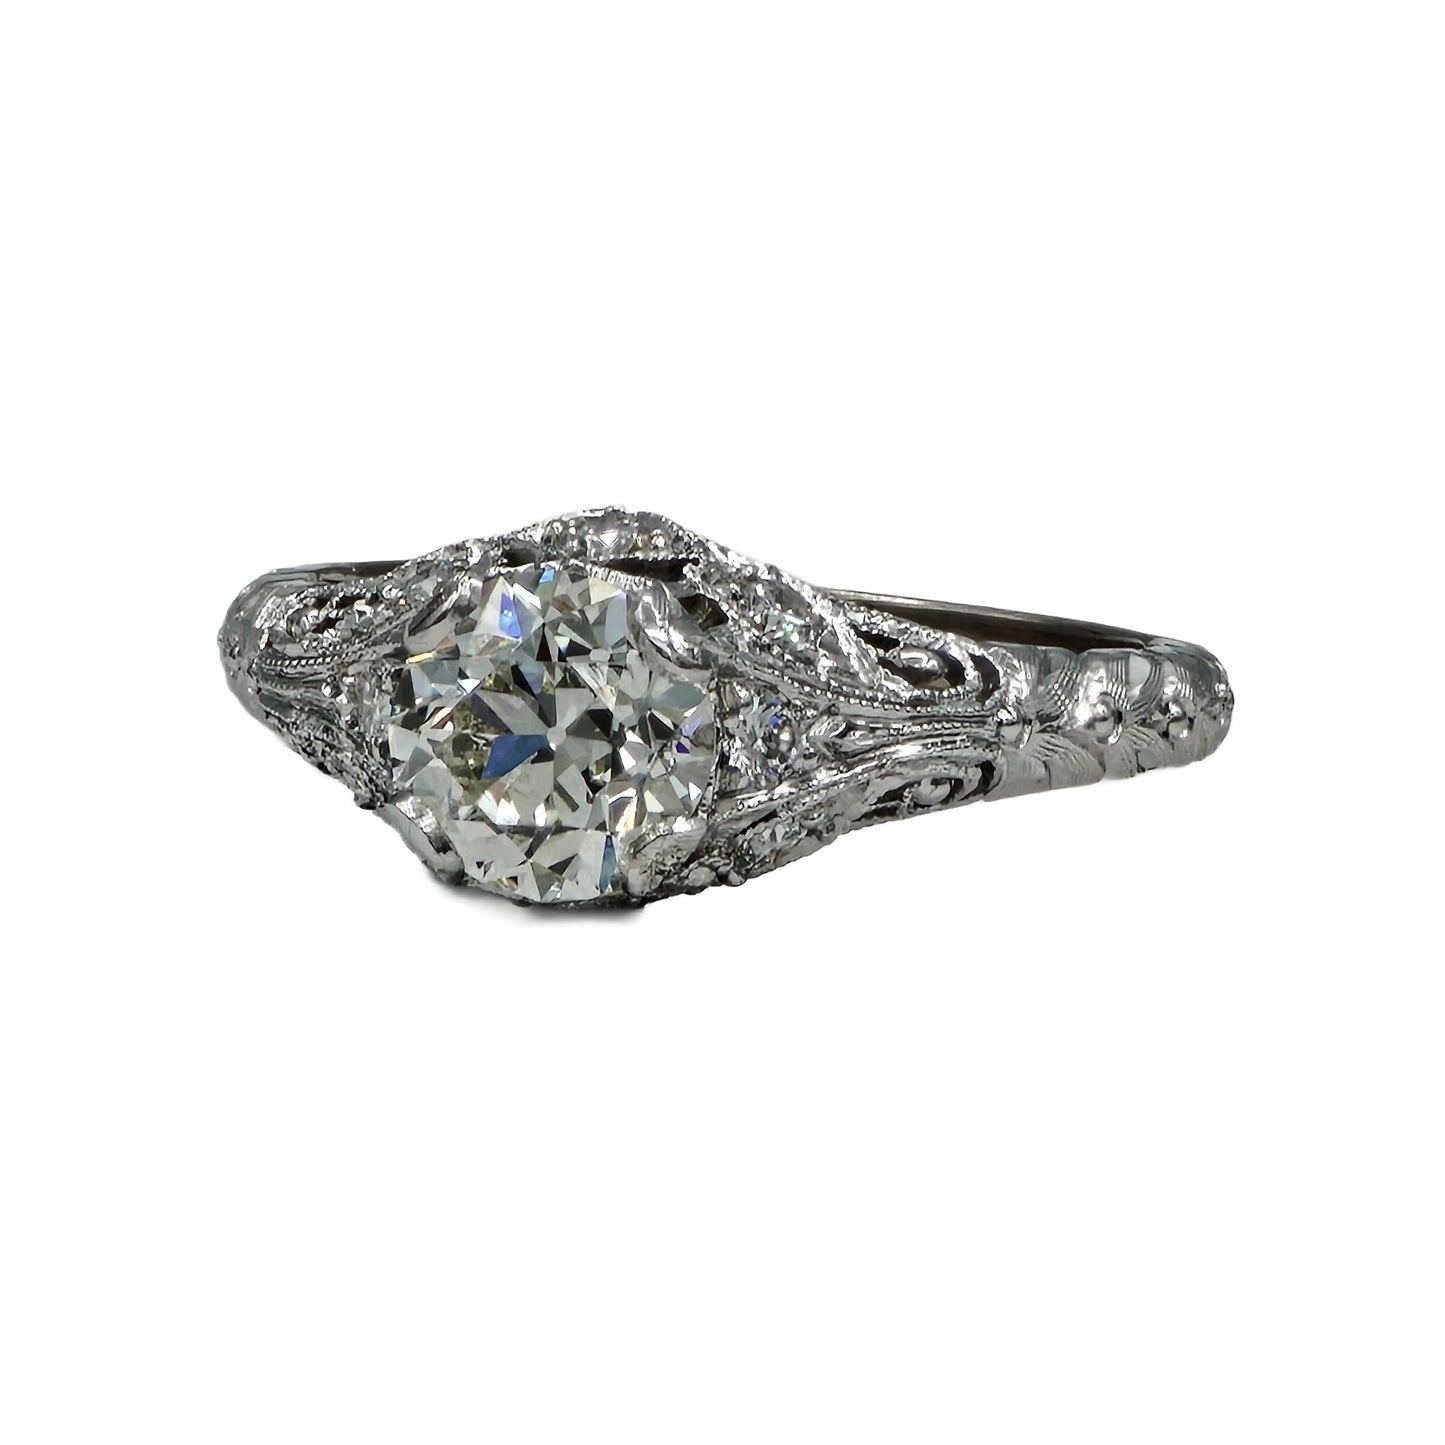 Whitehouse Brothers Diamond Ring